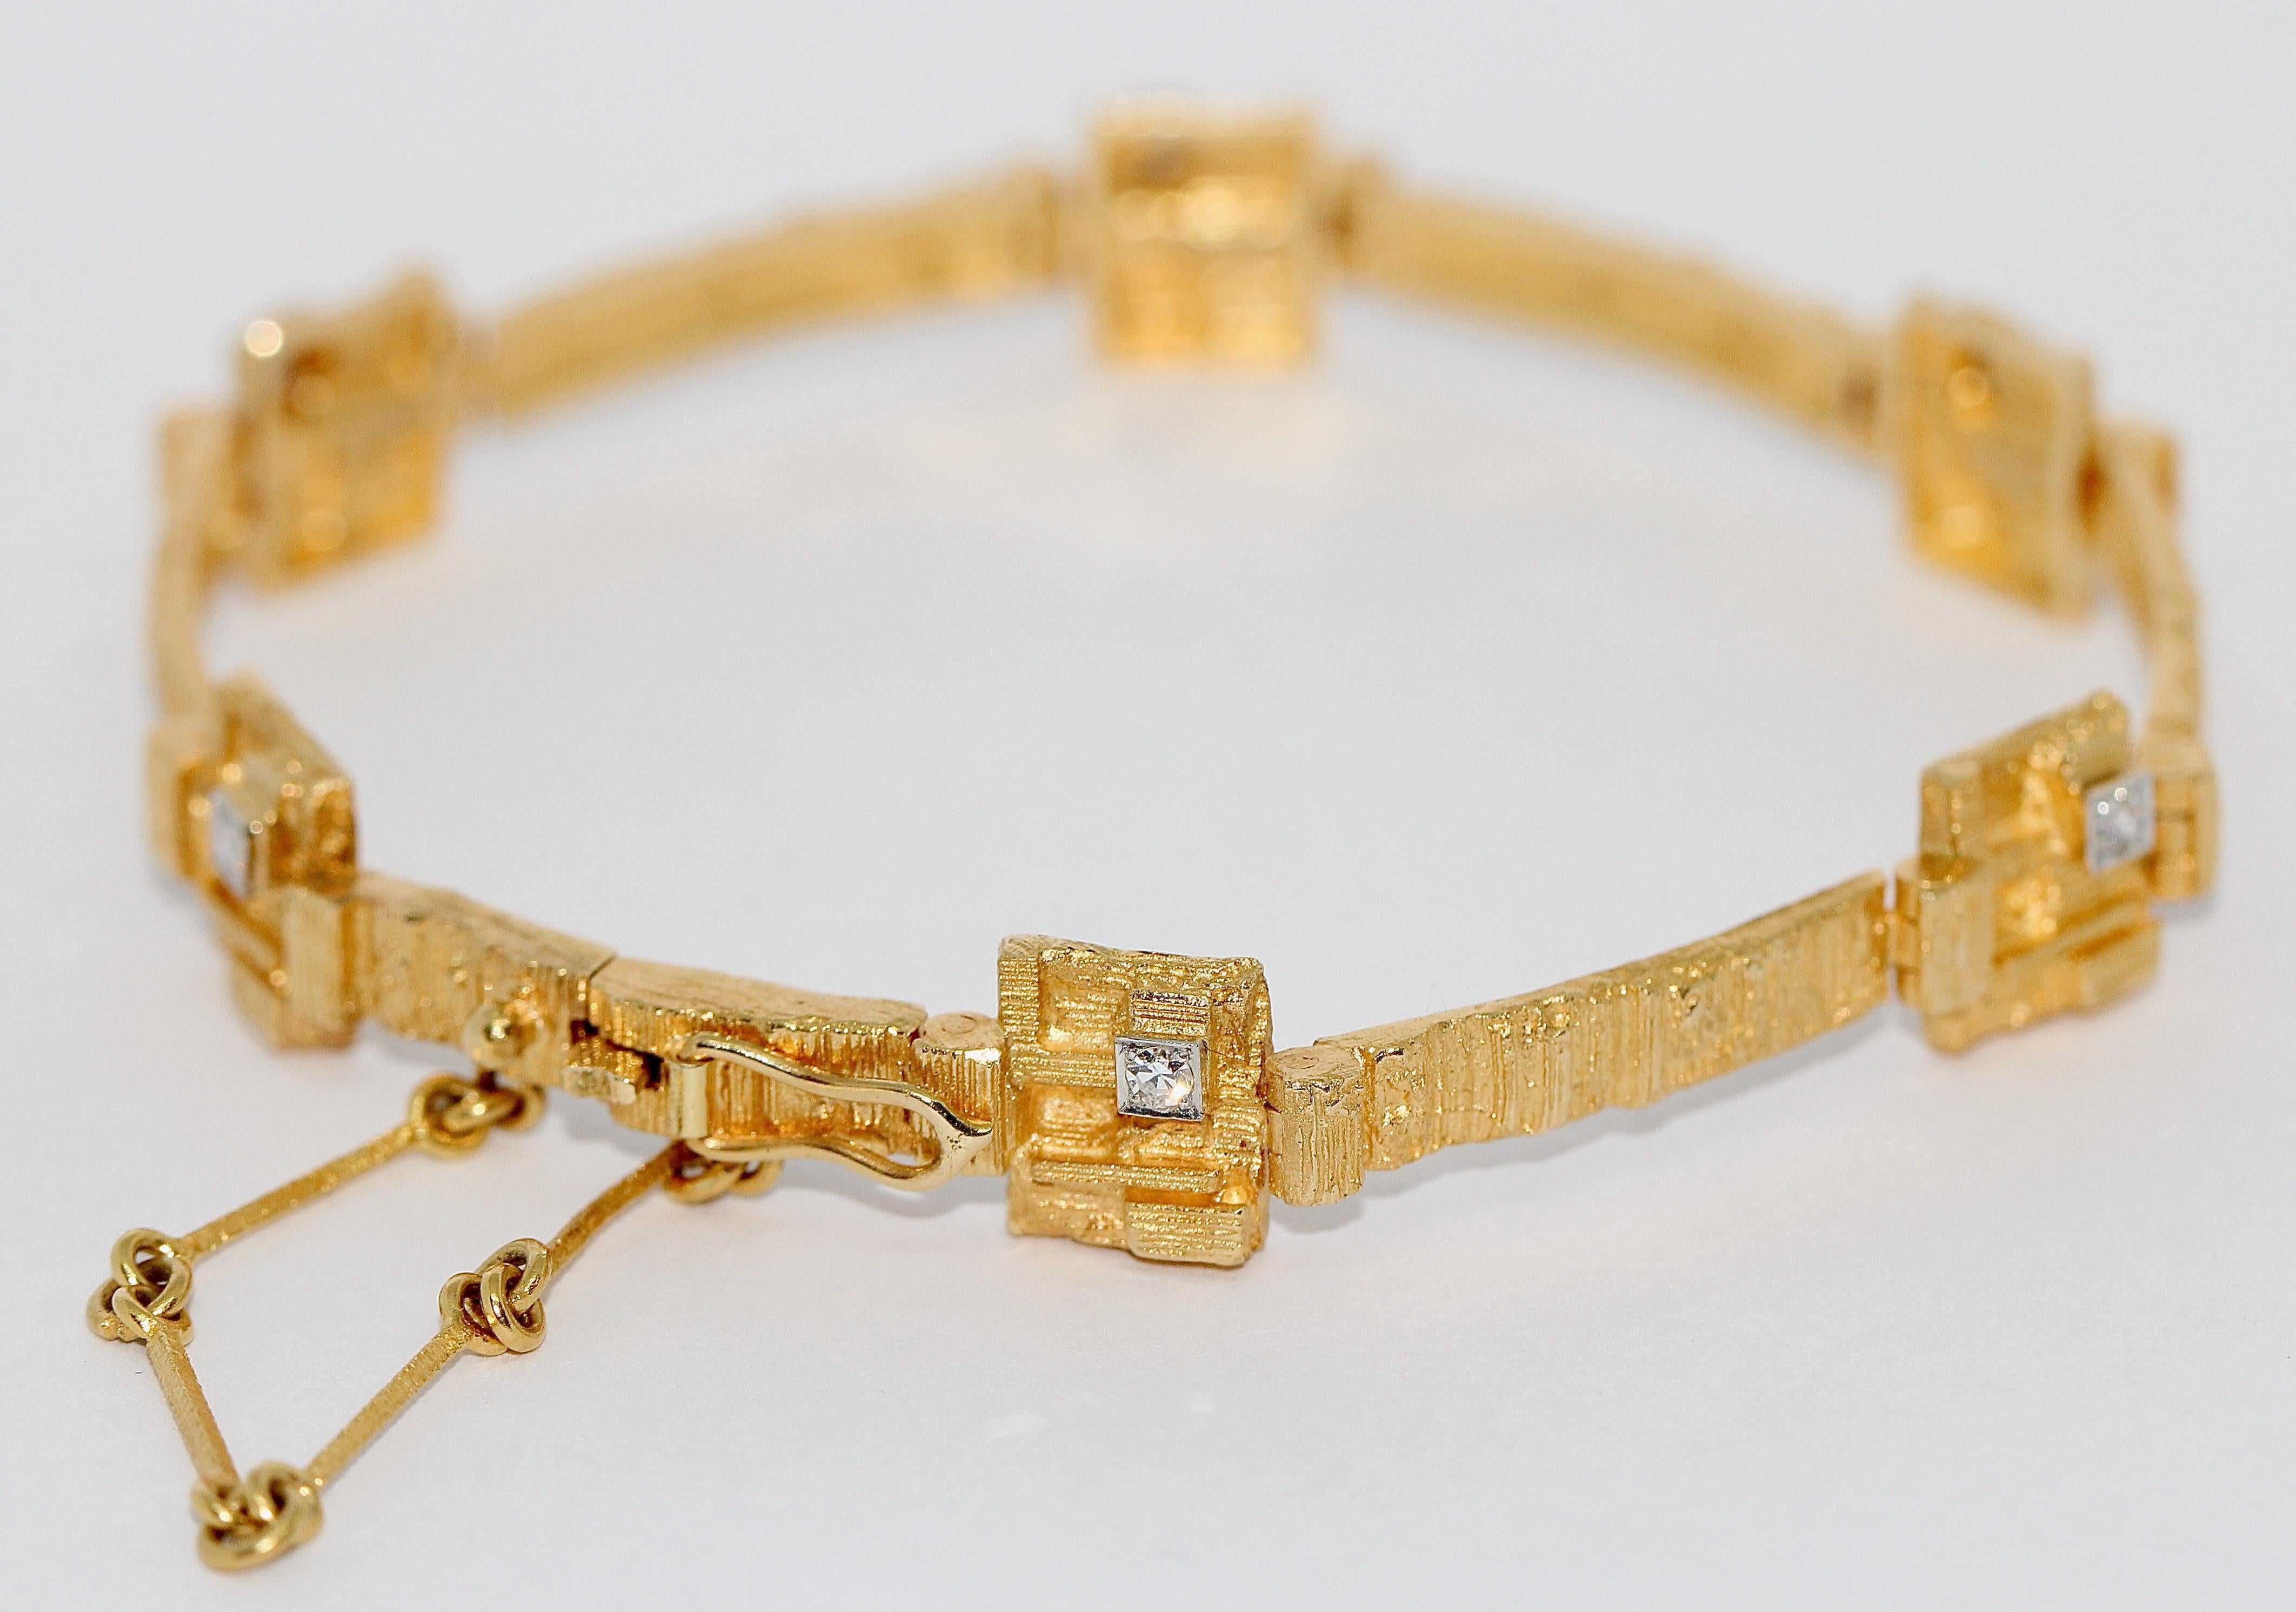 Designer Bracelet by Lapponia, 18 Karat yellow gold with six diamonds.

Weight: 15.4 Grams.

Including certificate of authenticity.